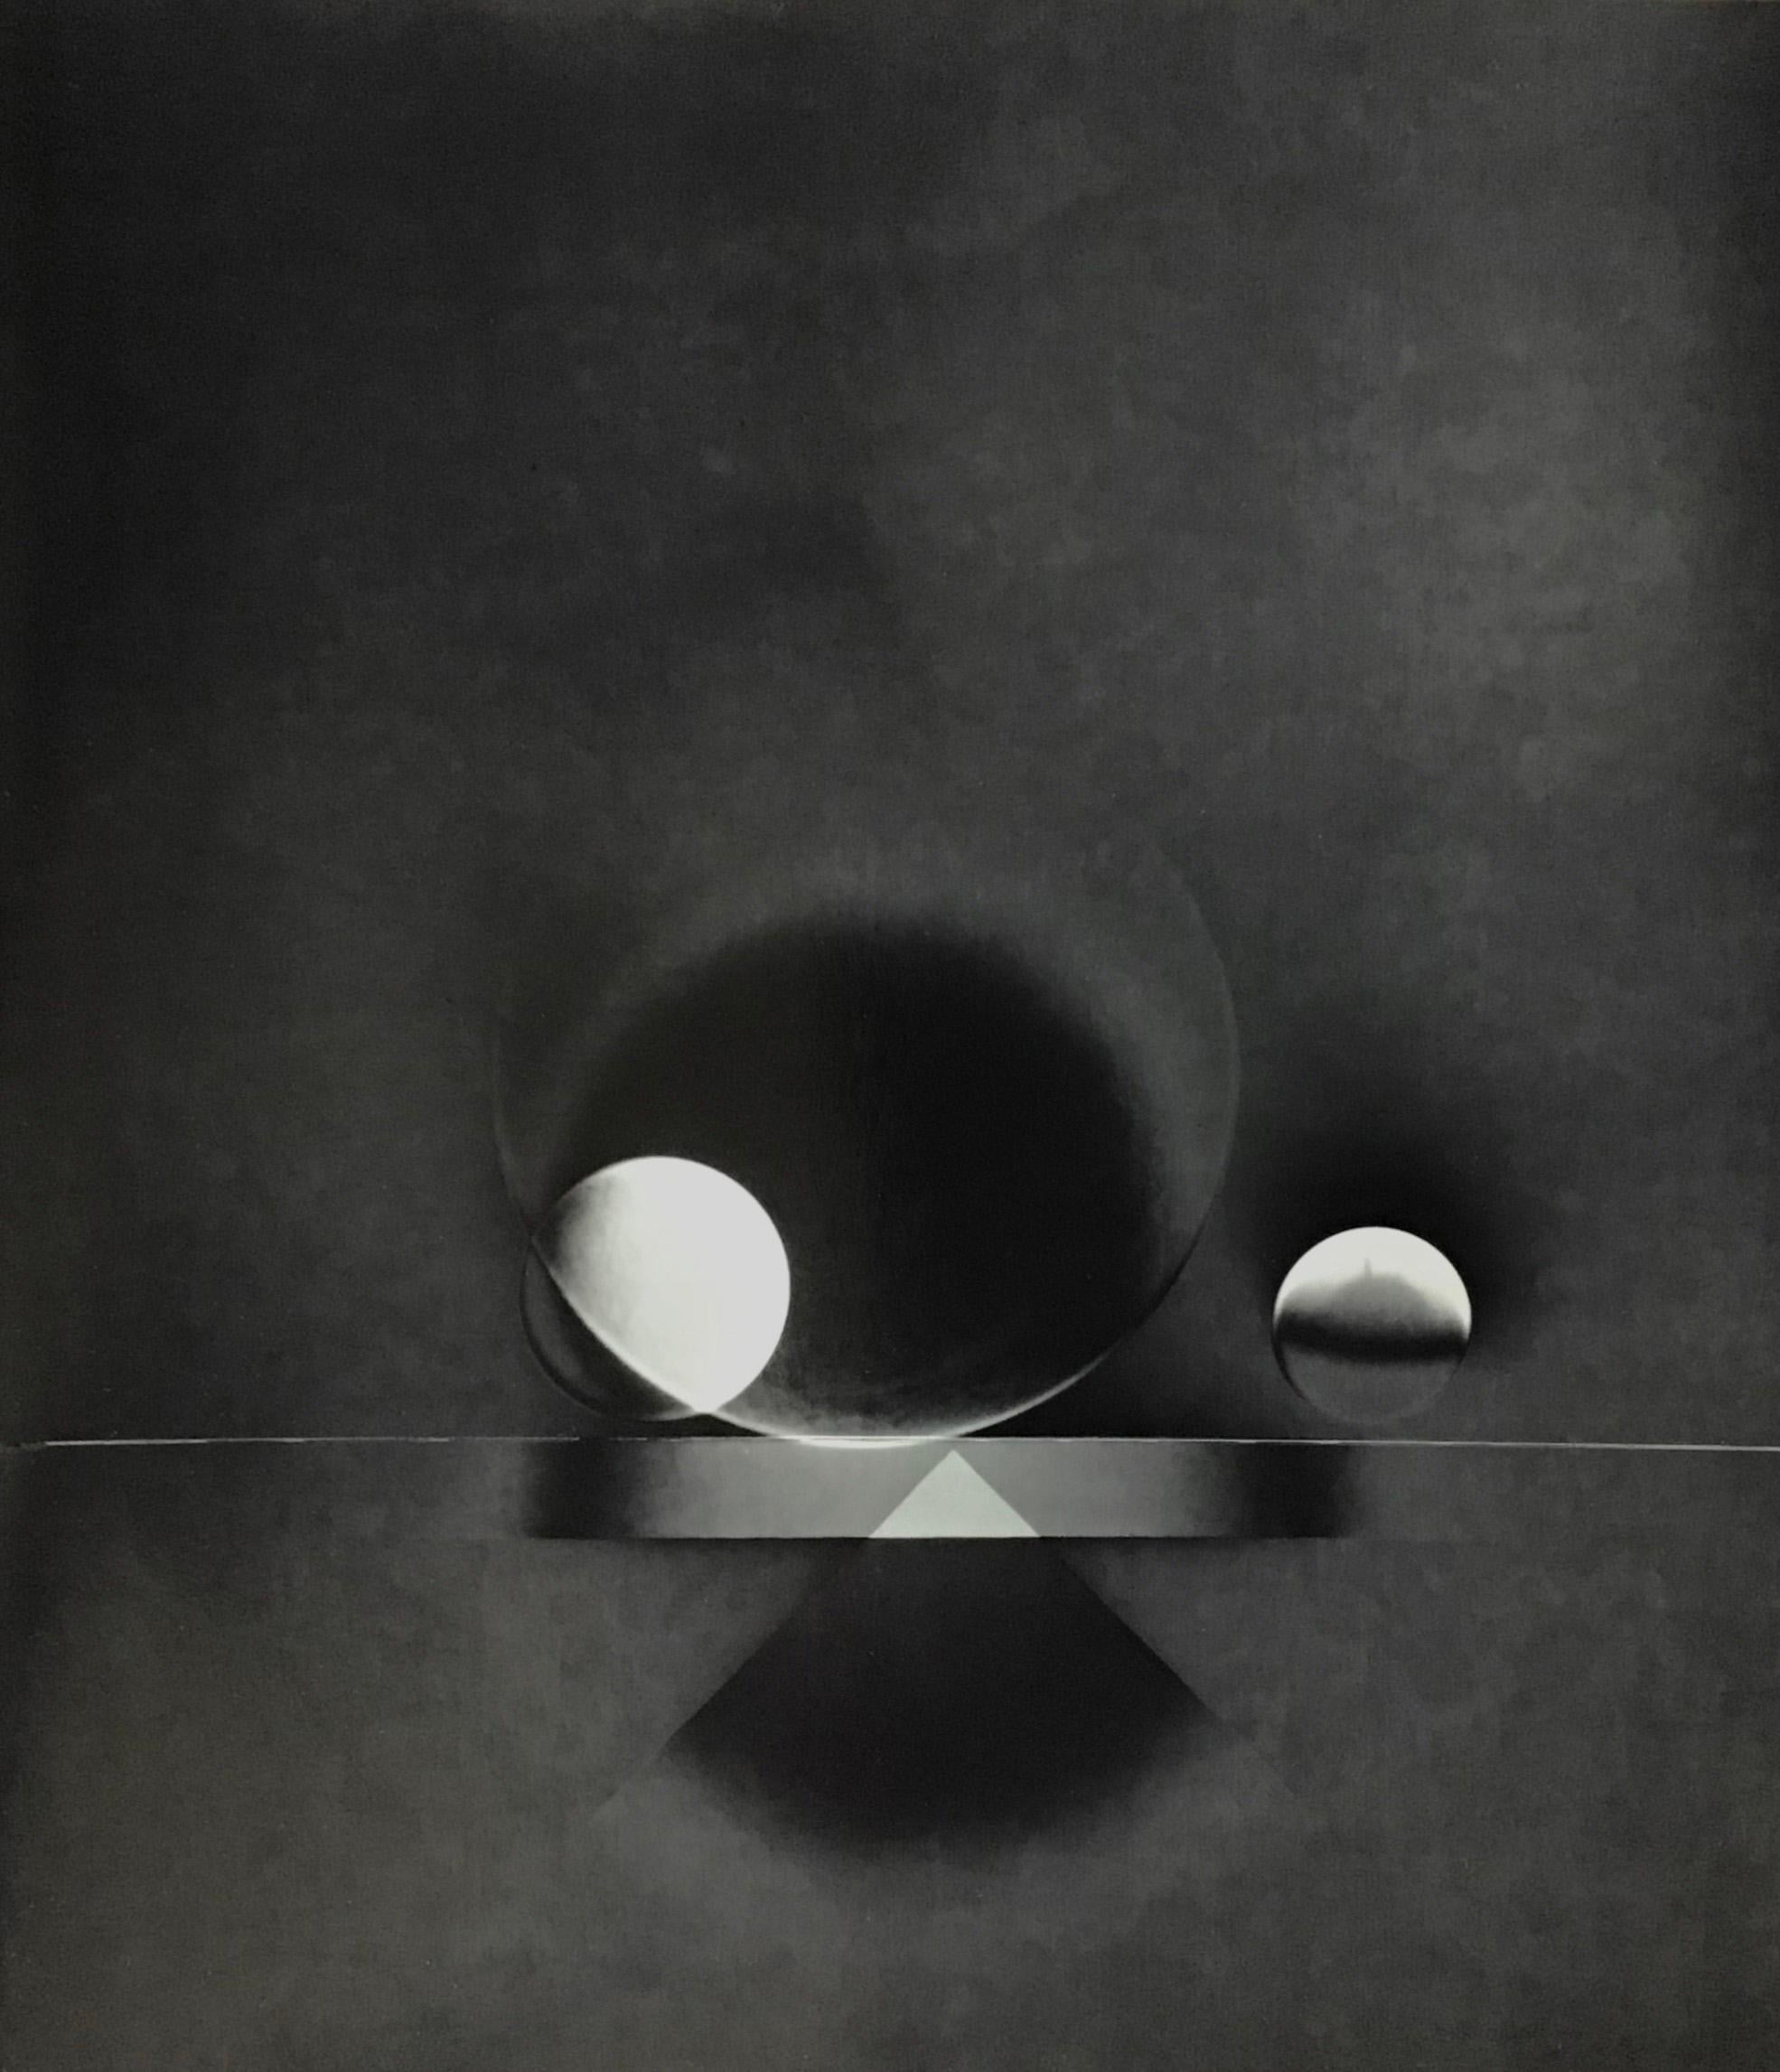 ATO>MIC #13, Unique Silver Luminogram Print, Two spheres and triangle with shade en vente 2